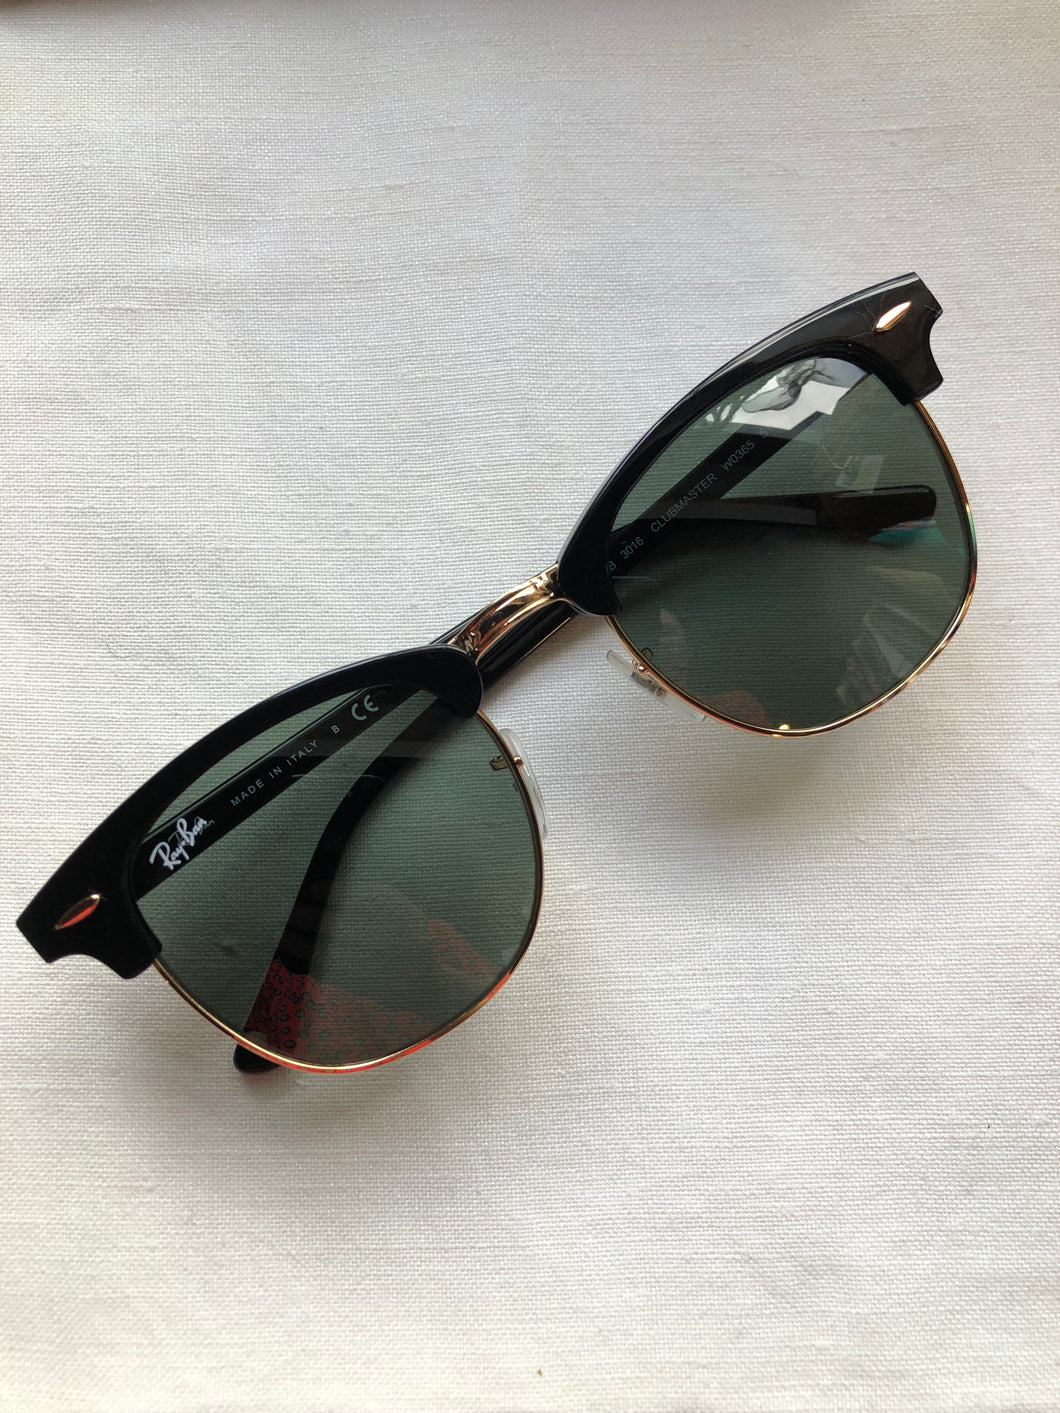 Kingspier - Ray-Ban Classic Clubmaster sunglasses with gloss black frame, gold metal lens trim and hardware, square shape, green G-15 lens, class 3 lens. Made in Italy.